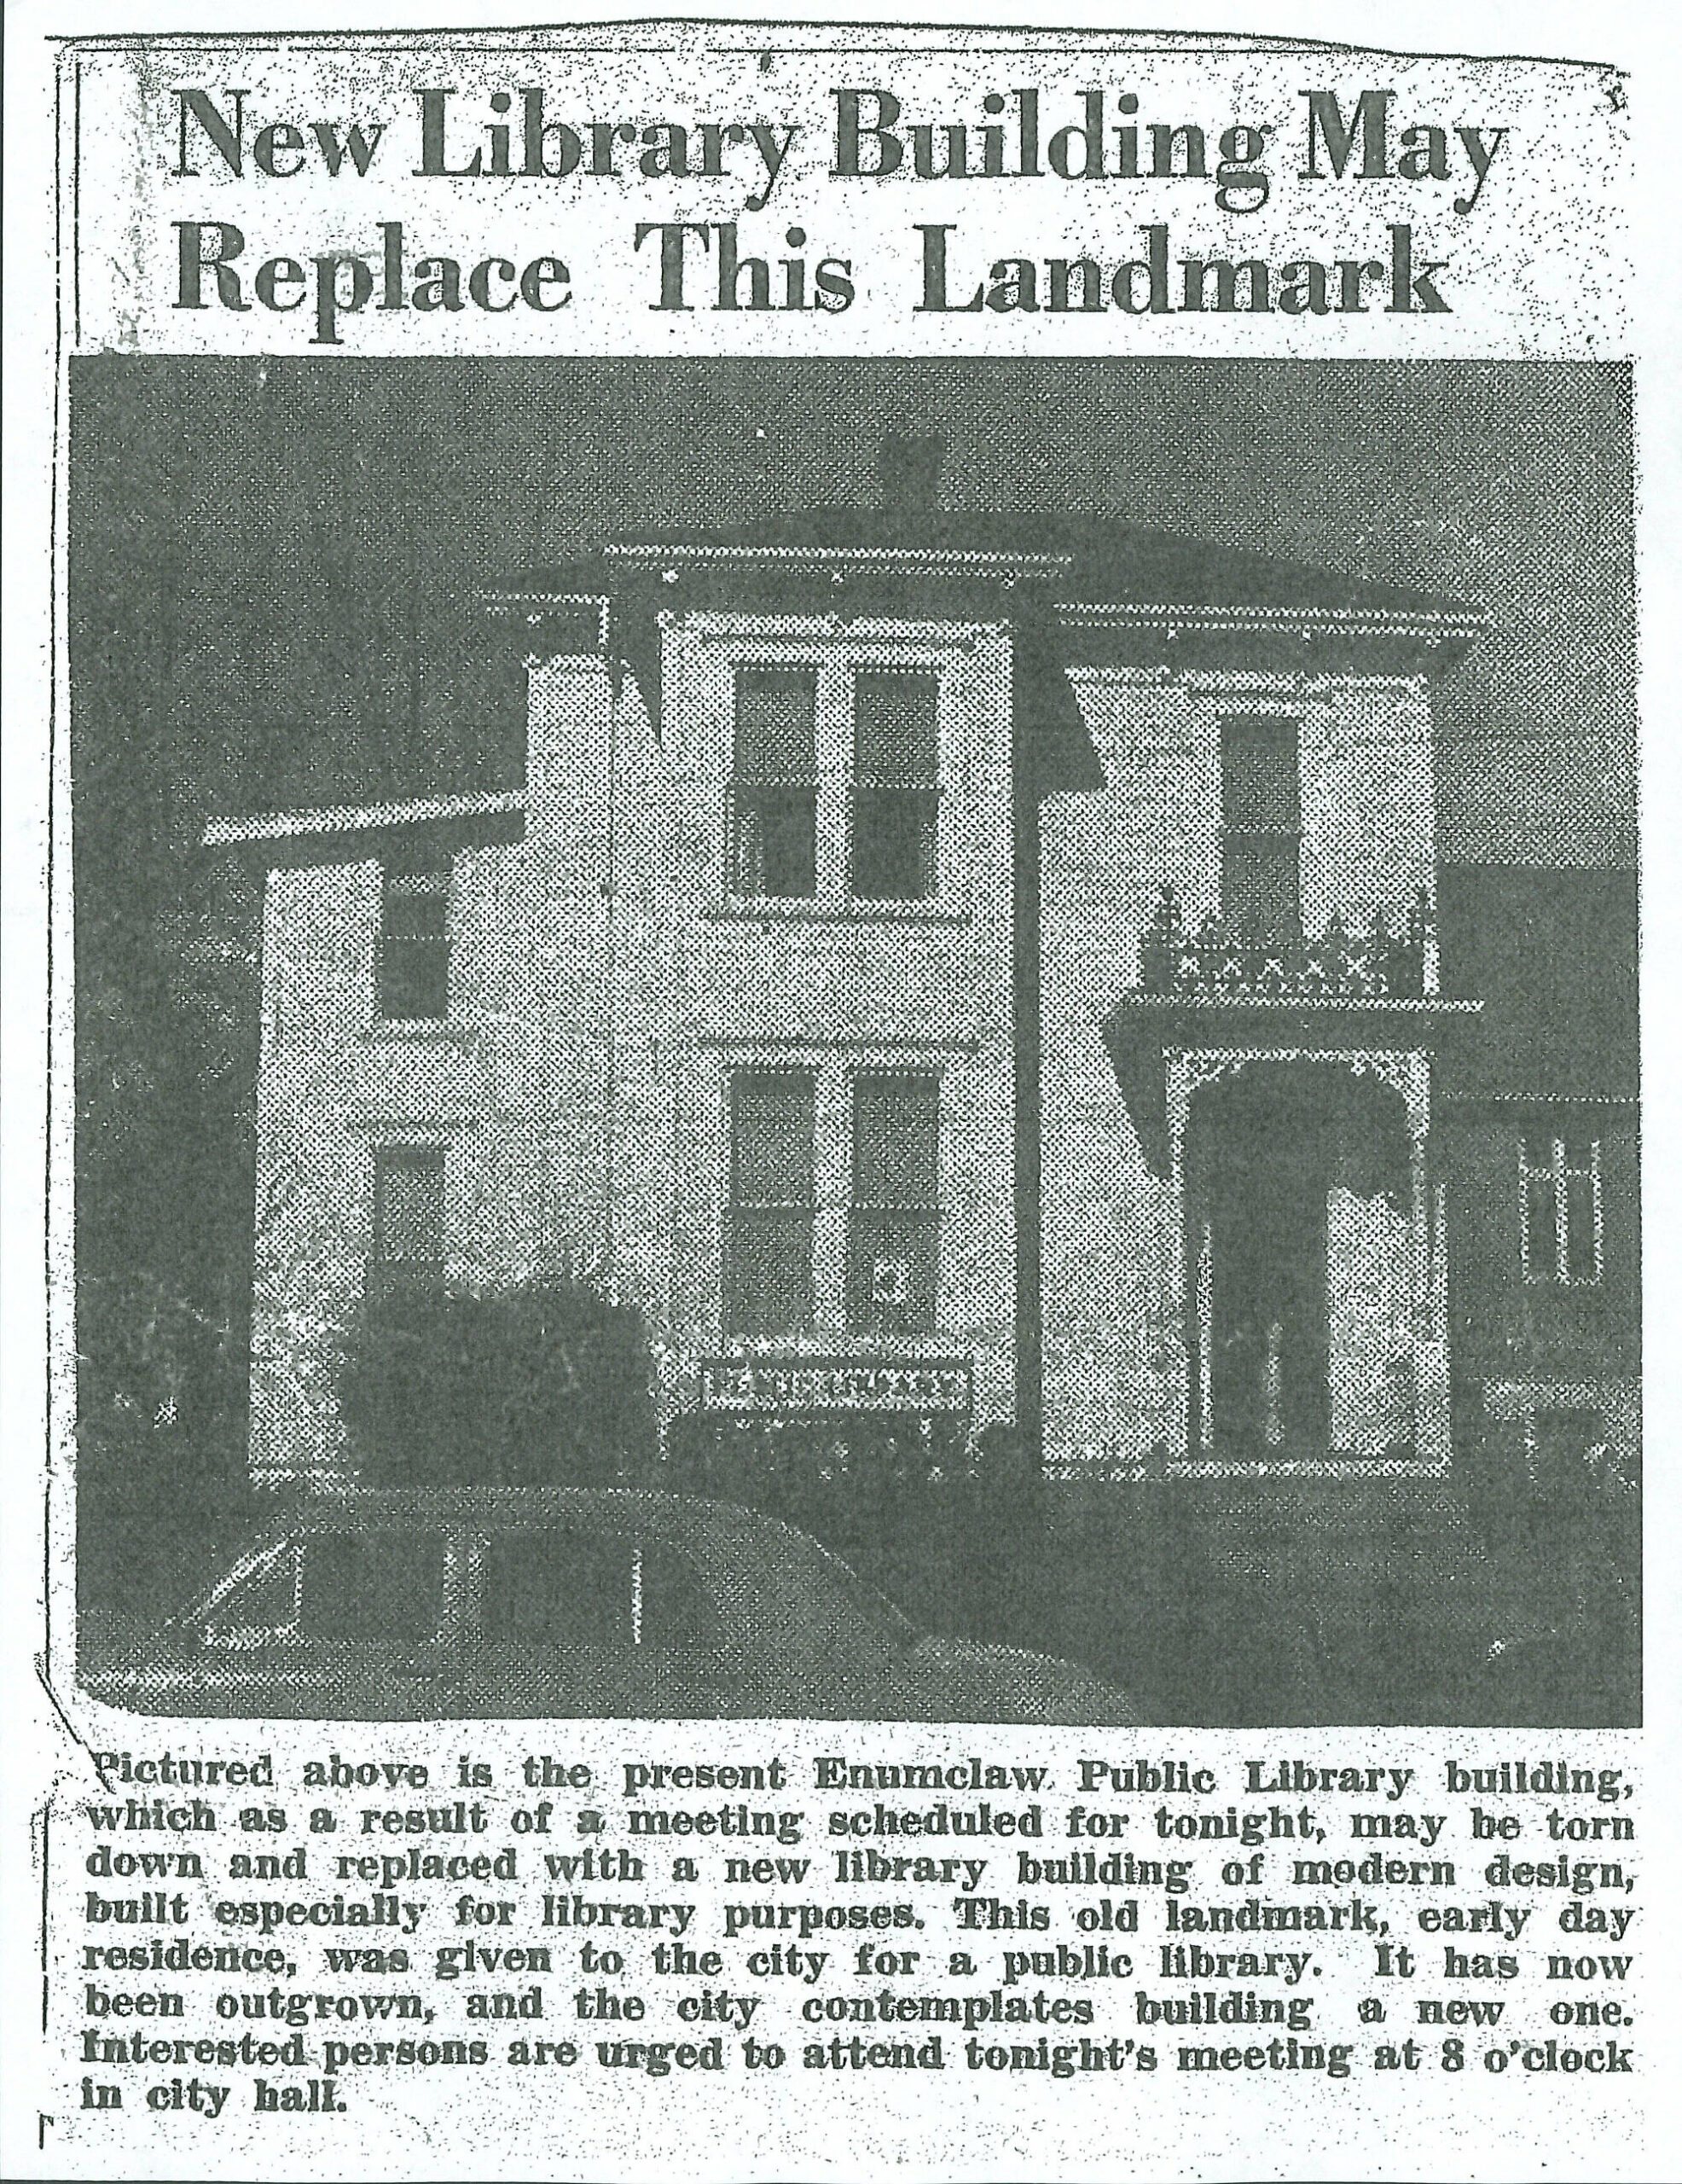 Courtesy Enumclaw Historical Museum
A clip from a Courier-Herald newspaper announcing that the building pictured, previously the home of Enumclaw founders Frank and Mary Stevenson, is being considered for demolition in order to build a larger library.